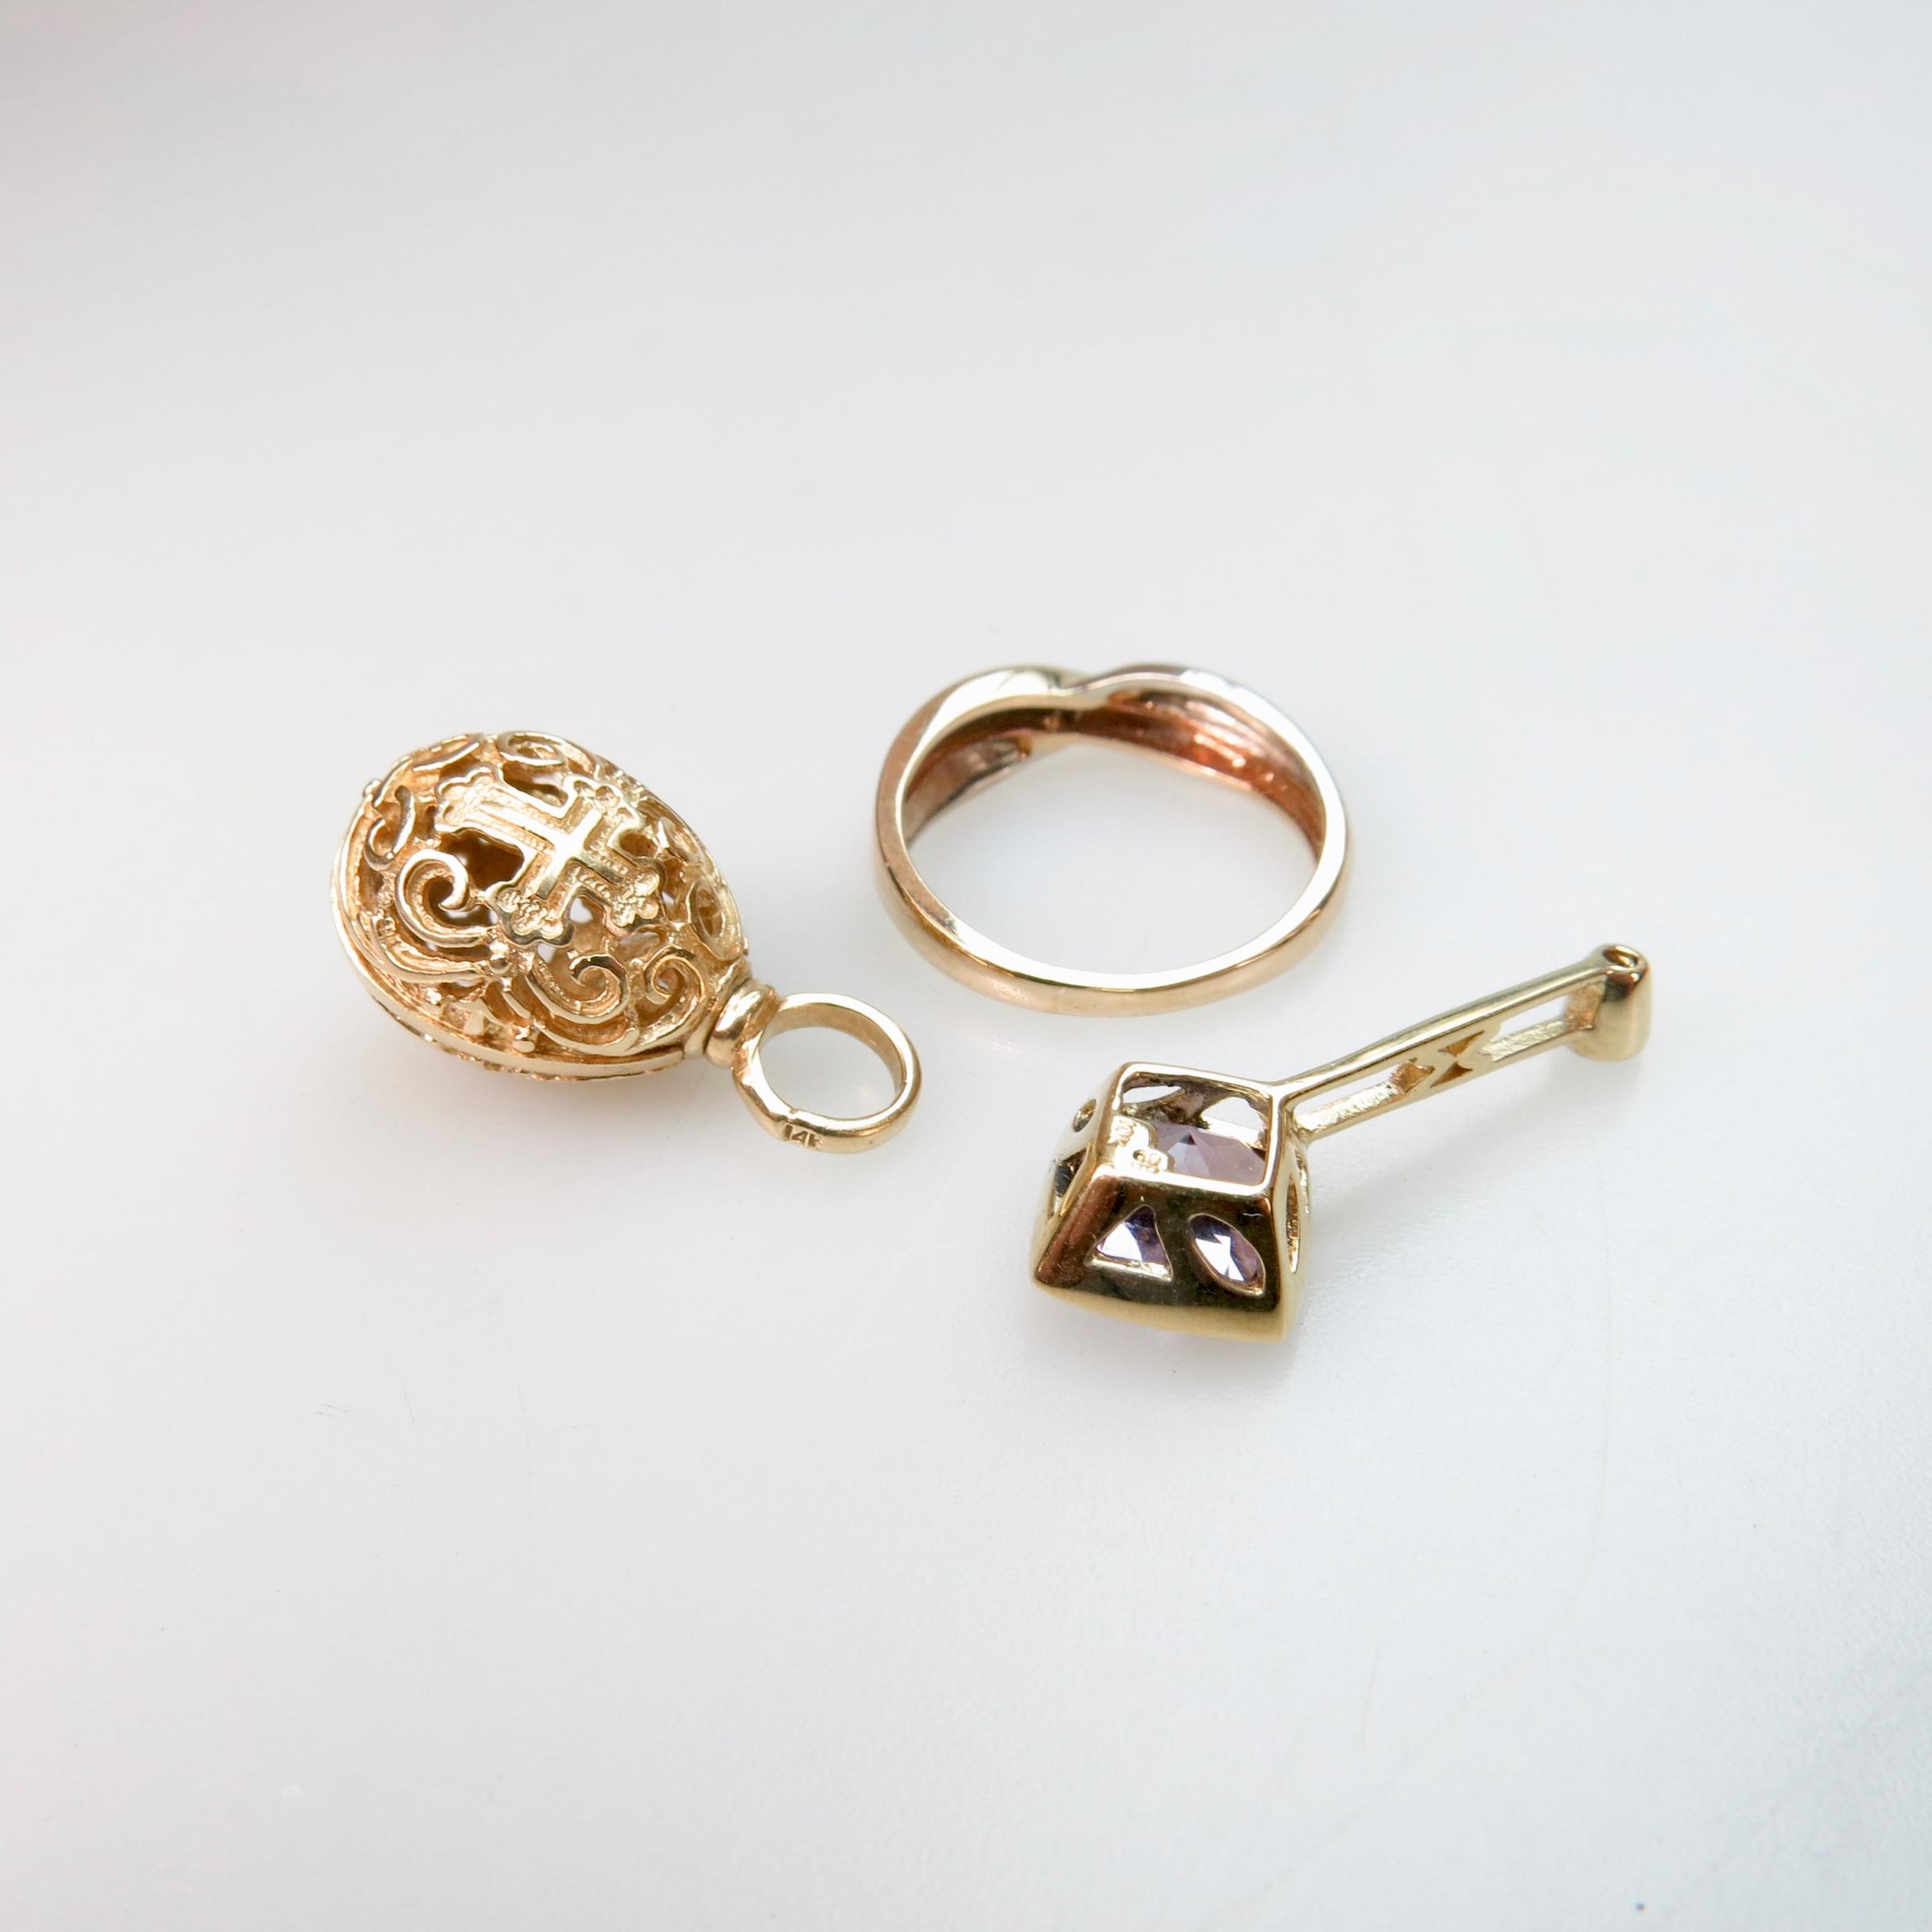 3 Pieces Of Yellow Gold Jewellery